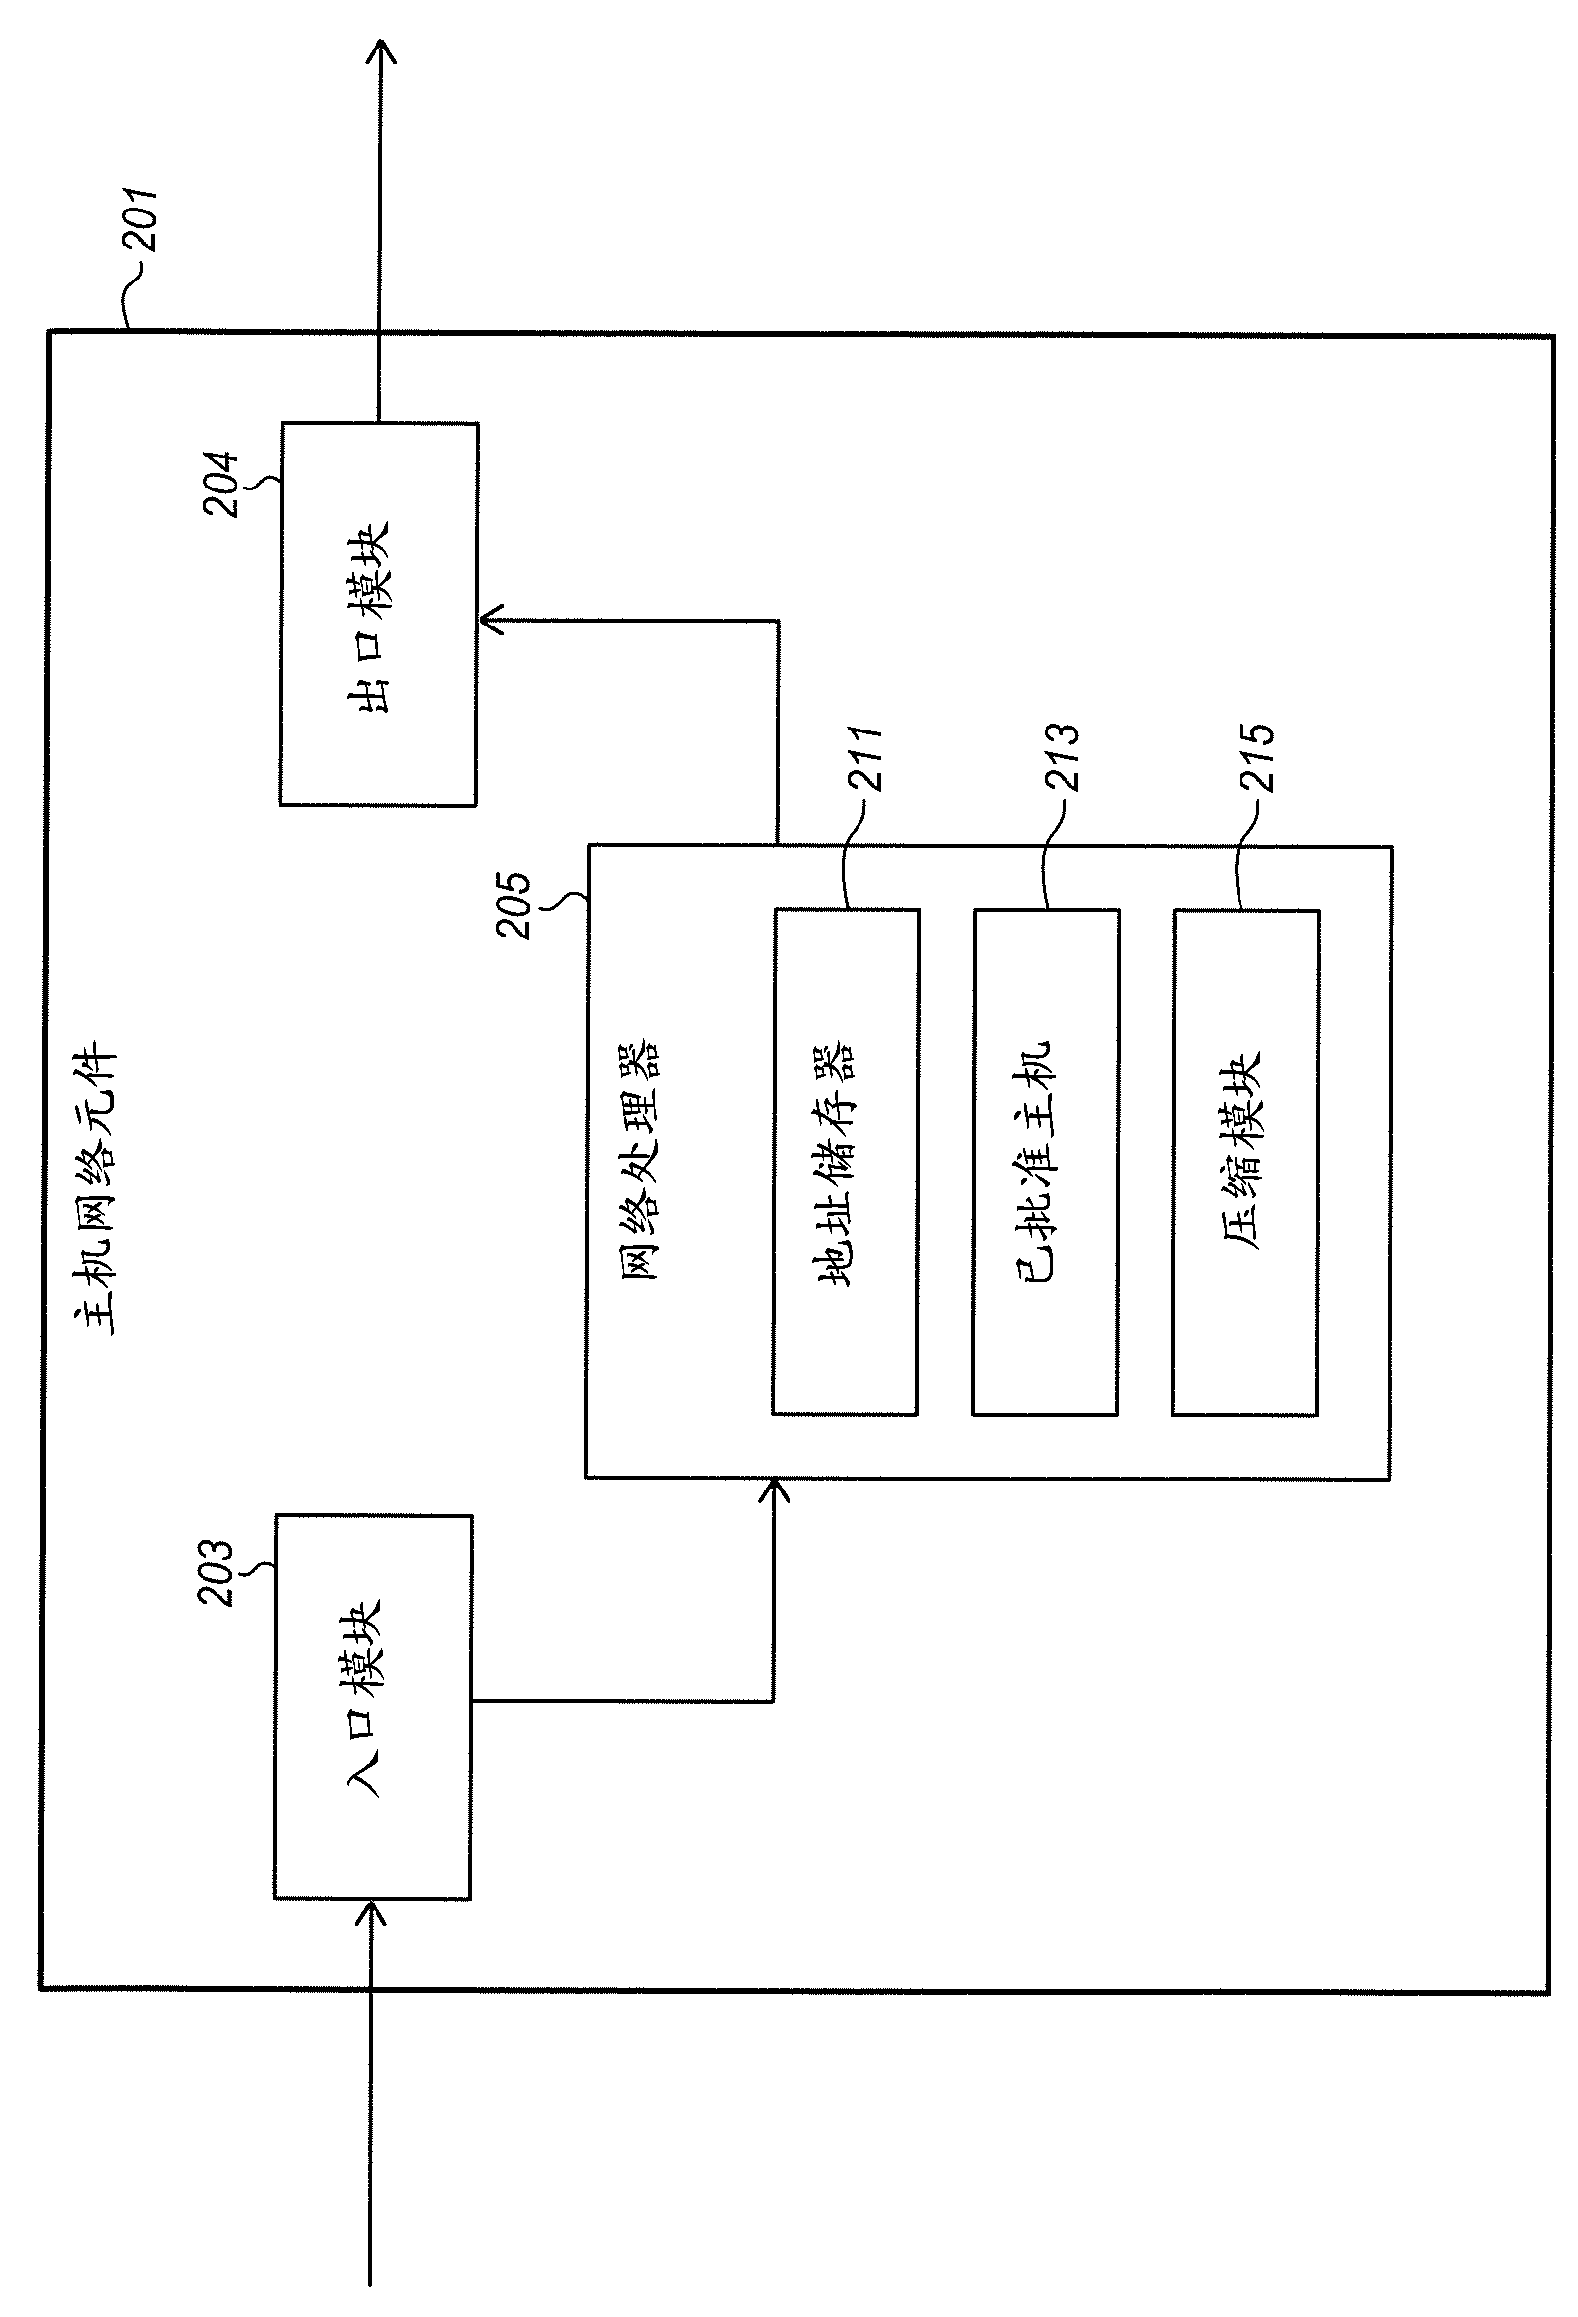 Label switched routing to connect low power network domains